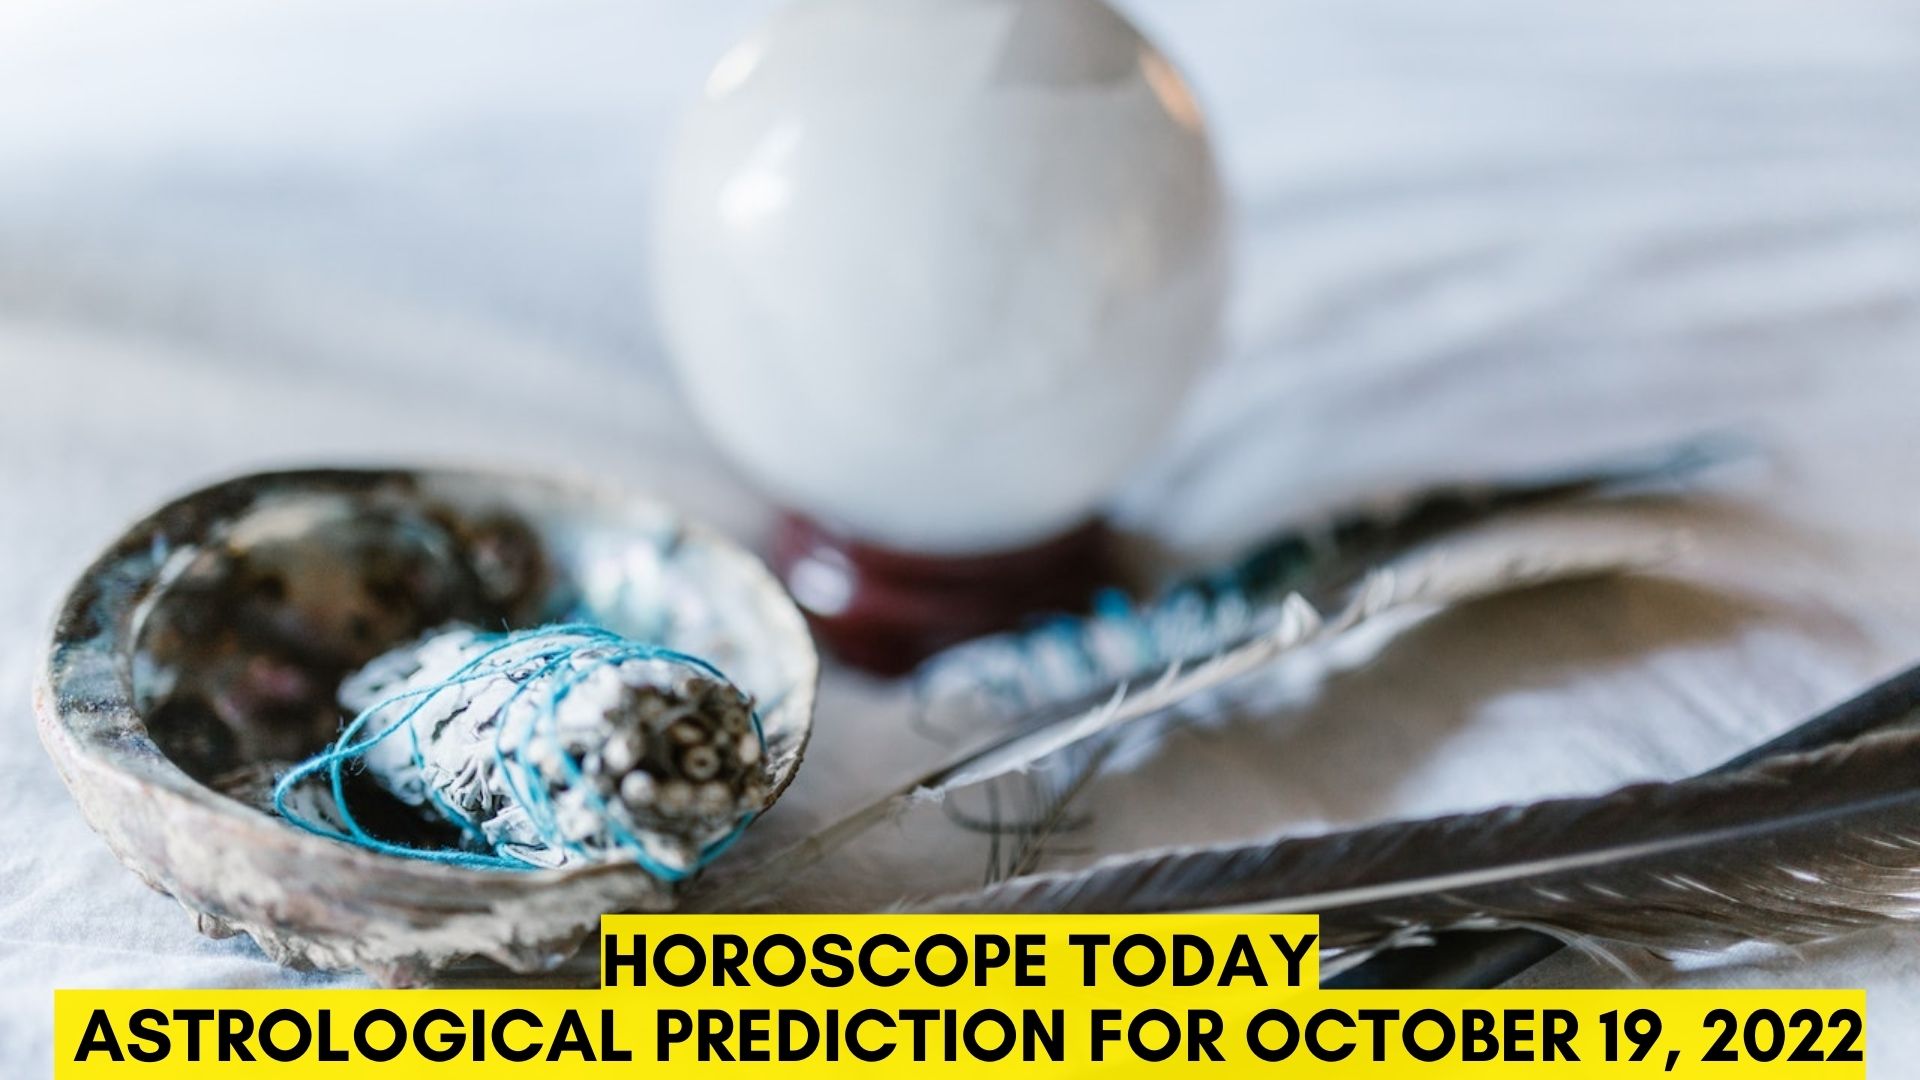 Horoscope Today - Astrological Prediction For October 19, 2022